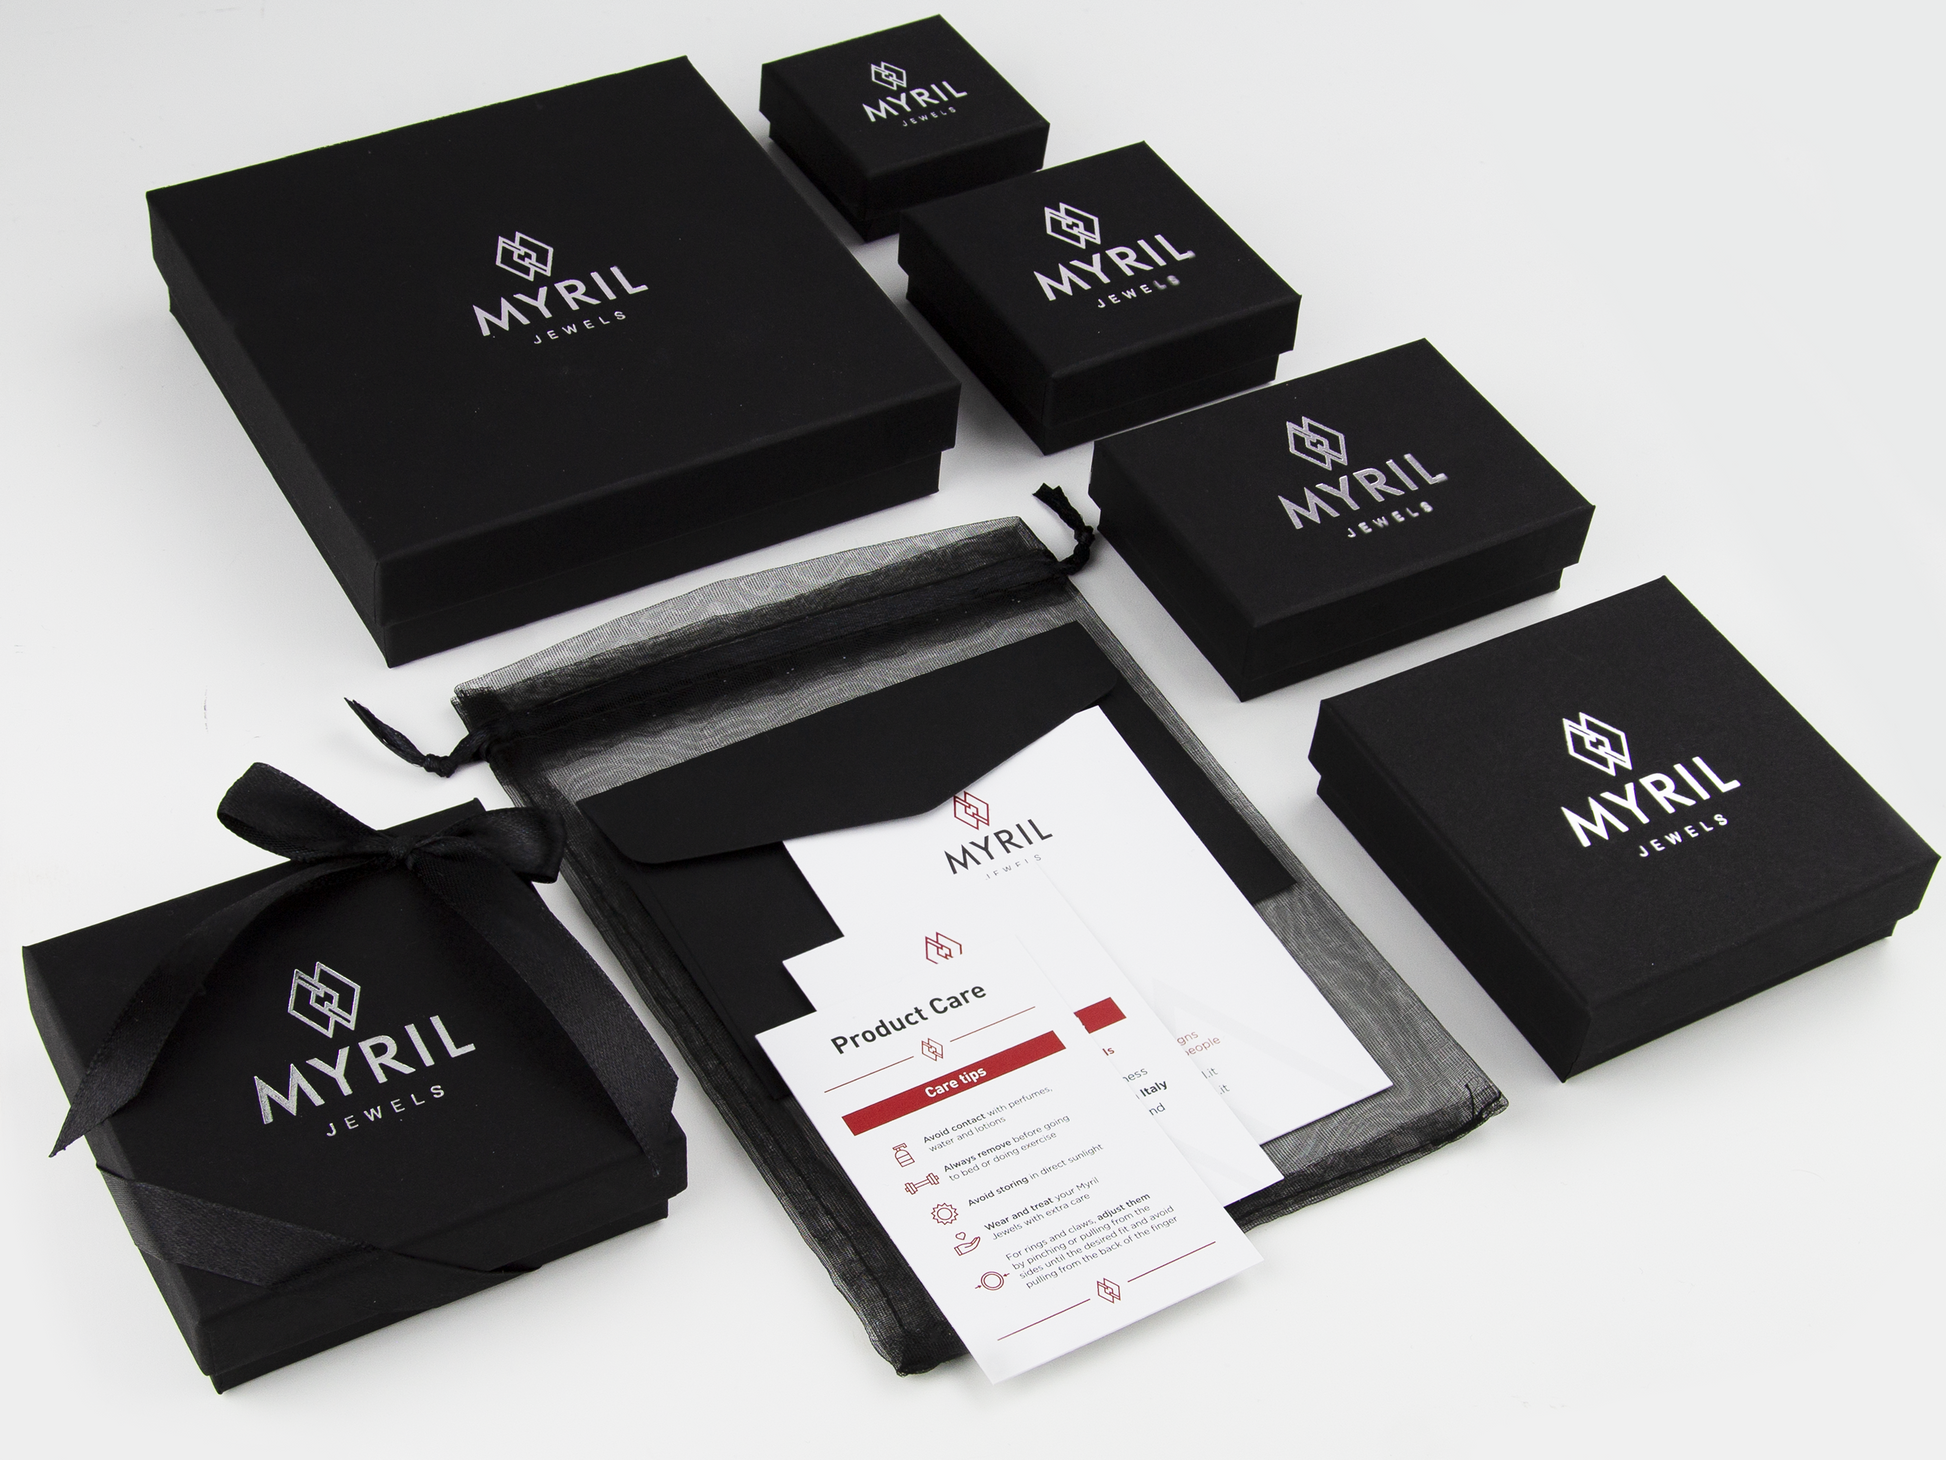  Elegantly presented Myril Jewels packaging, featuring an array of sophisticated black boxes emblazoned with the brand's logo, offers a darkly avant-garde unboxing experience, ideal for gifts that cater to lovers of neo-gothic, witchcore, and minimalist goth aesthetics.